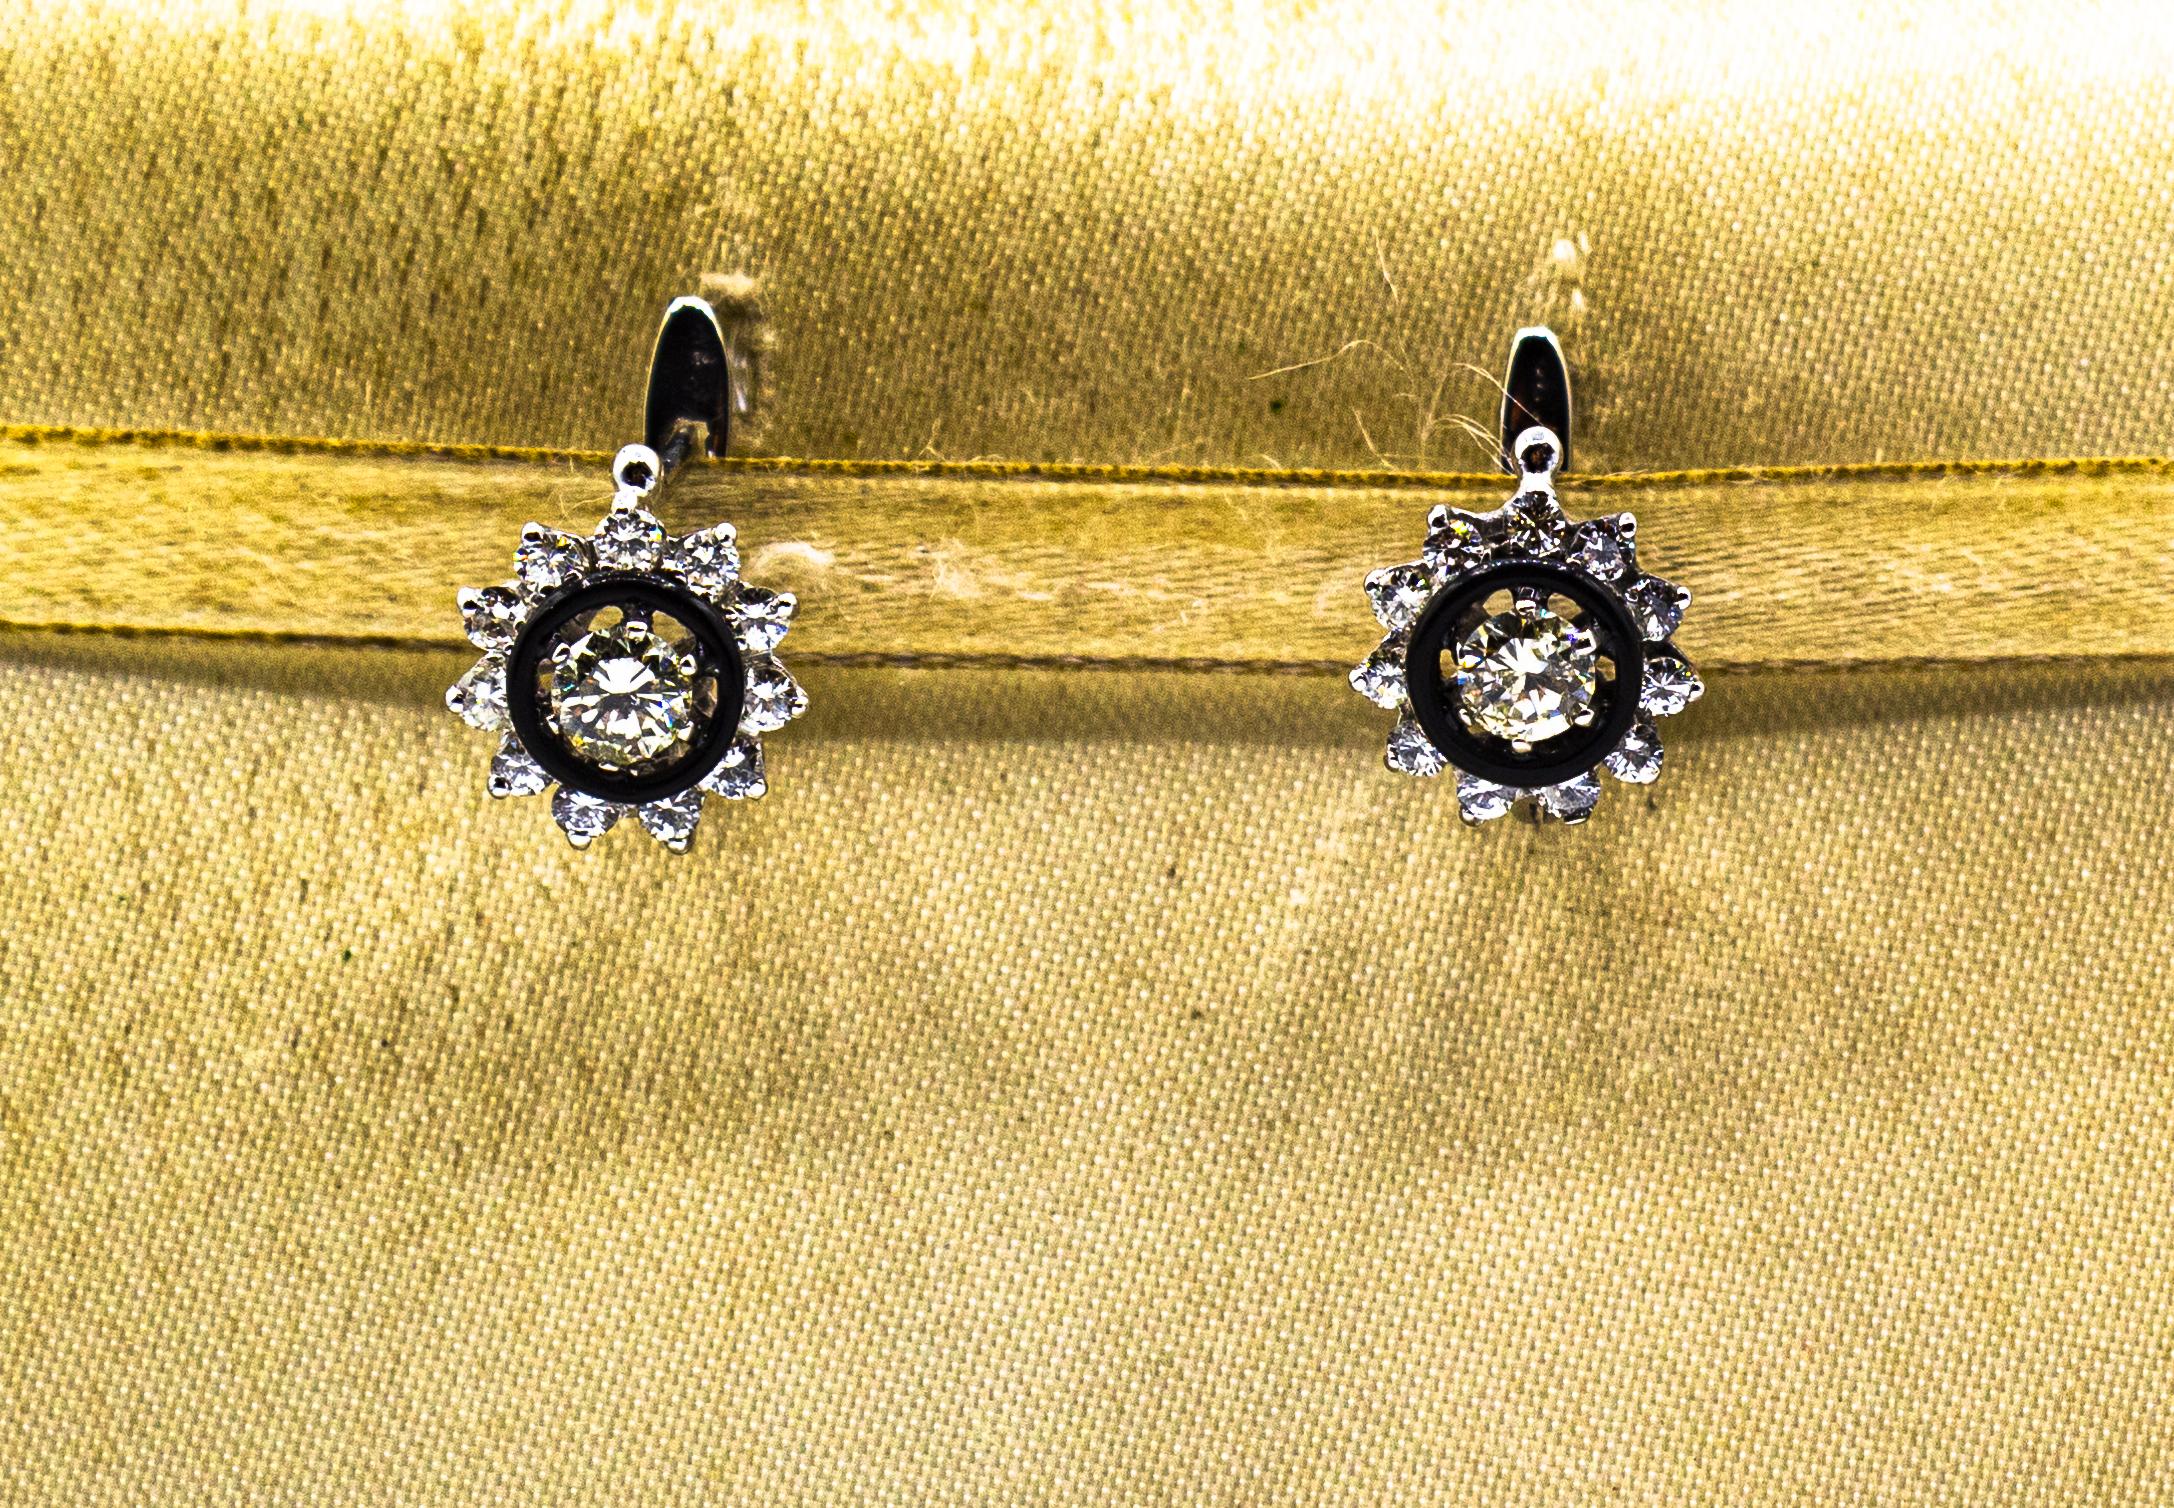 These Earrings are made of 18K White Gold.
These Earrings have 0.50 Carats of central White Brilliant Cut Diamonds. (0.25 Carats each one)
These Earrings have 0.55 Carats of lateral White Brilliant Cut Diamonds.
These Earrings have also